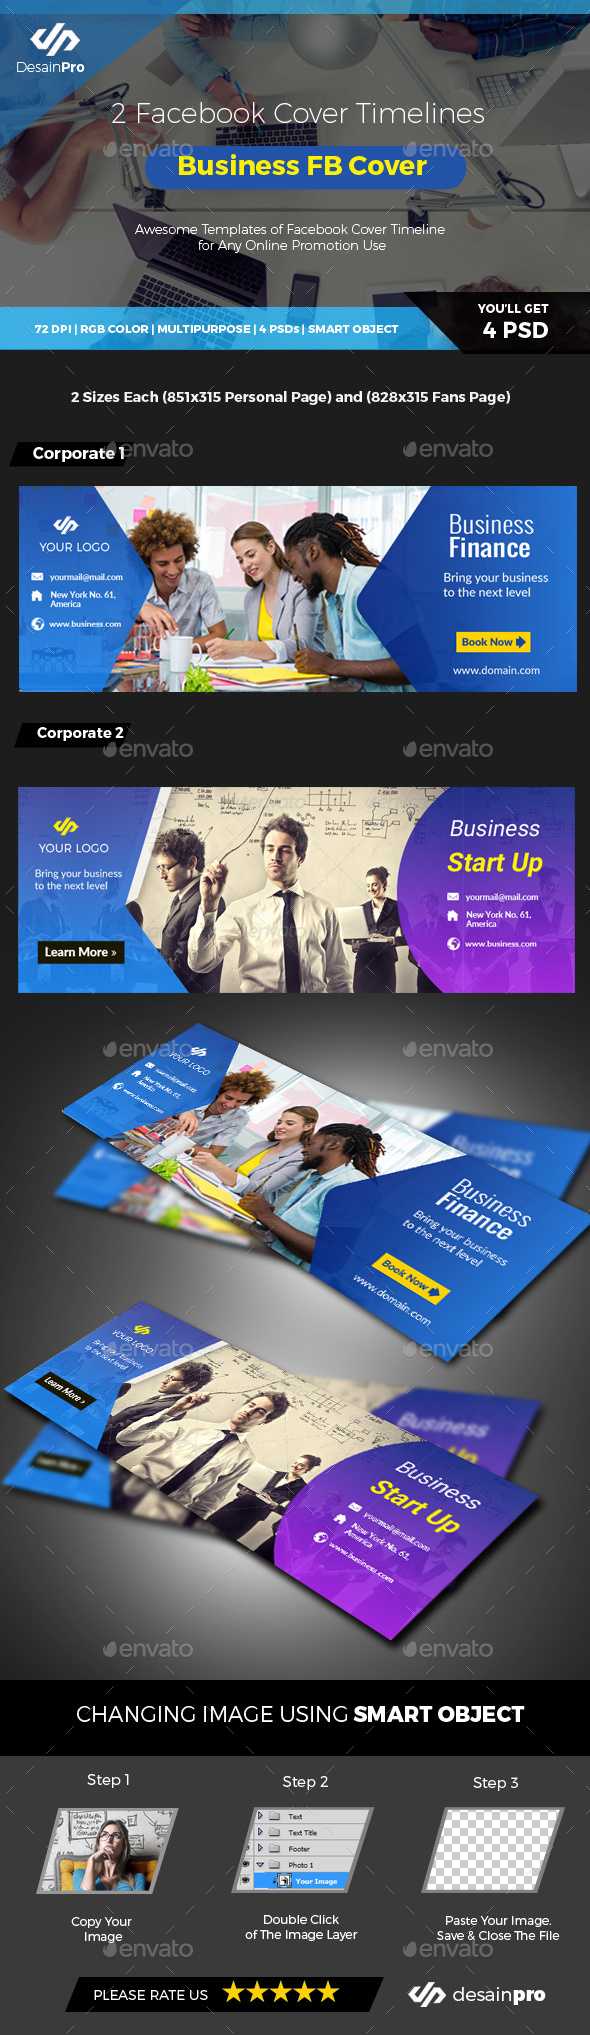 Business Fb Graphics, Designs & Templates From Graphicriver Within Facebook Templates For Business